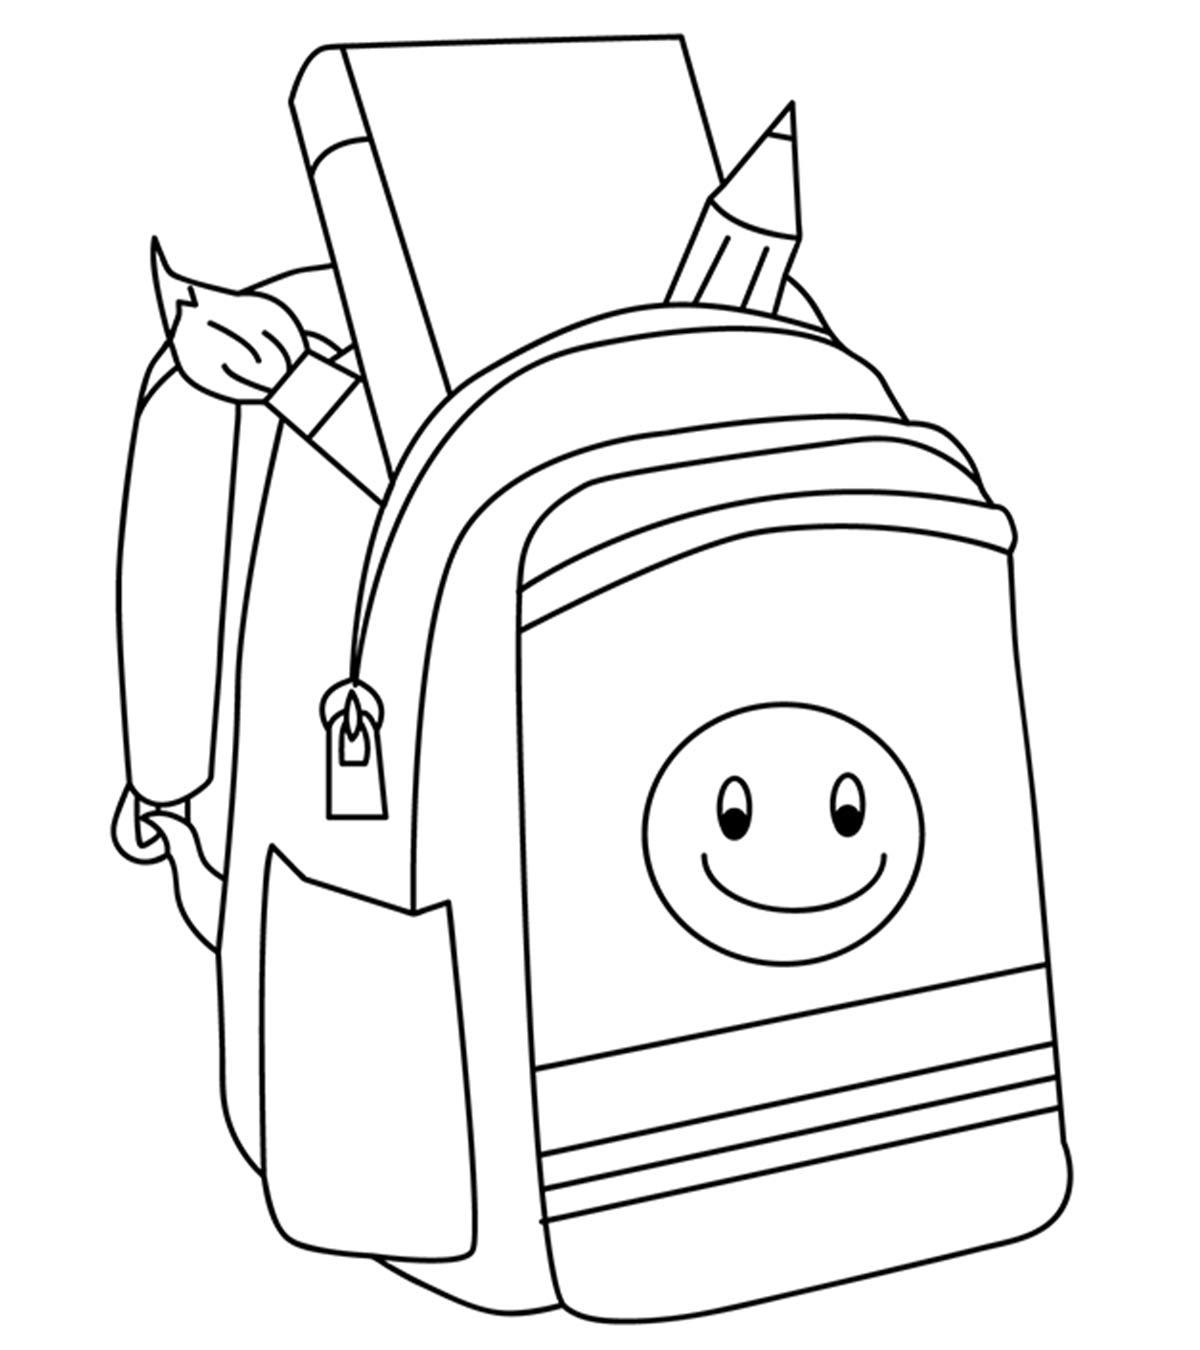 20 Fun Back To School Coloring Pages Your Toddler Will Love To Color_image